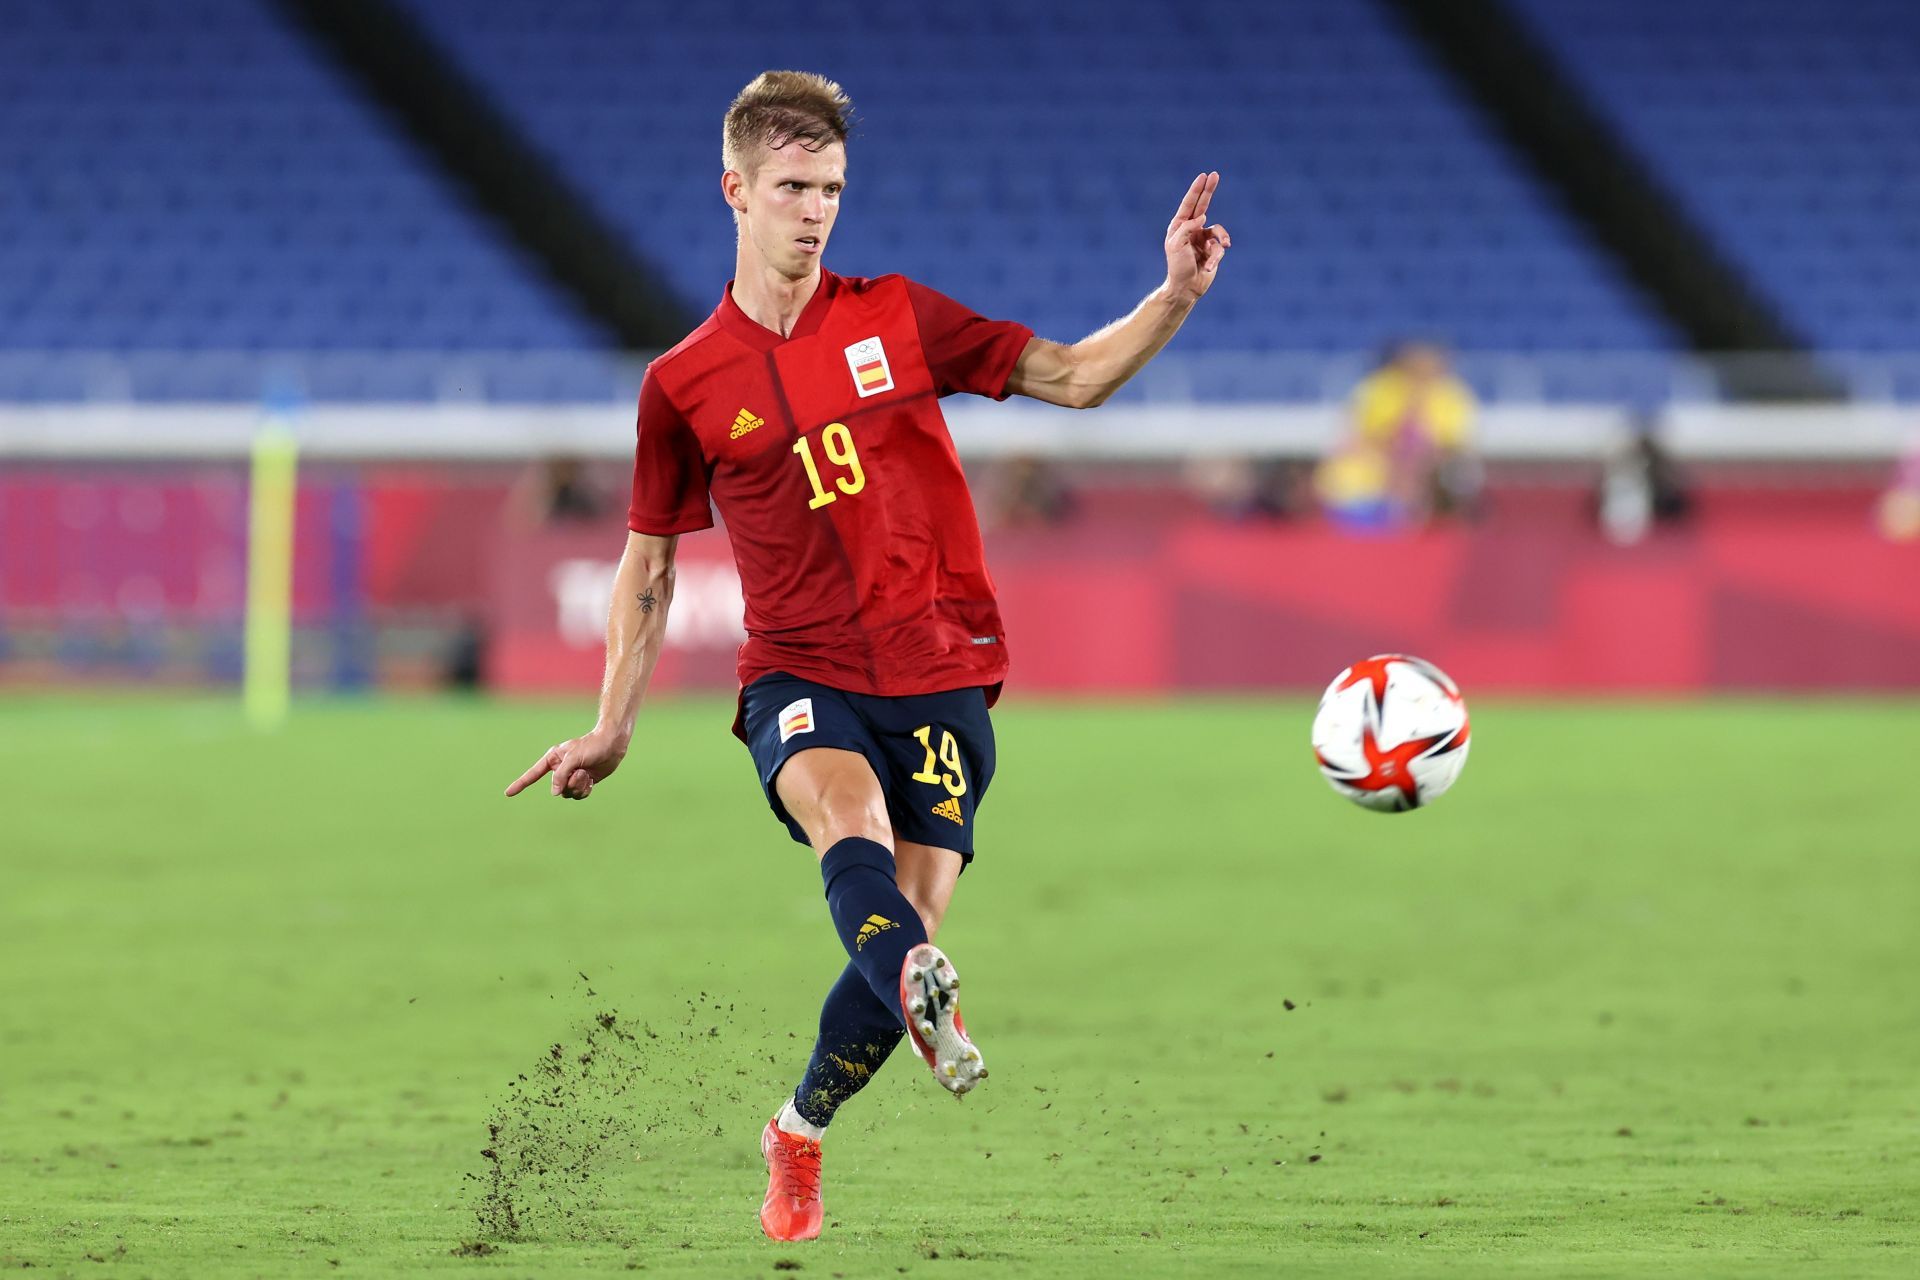 Dani Olmo has started negotiations with Manchester United over a possible move in January.